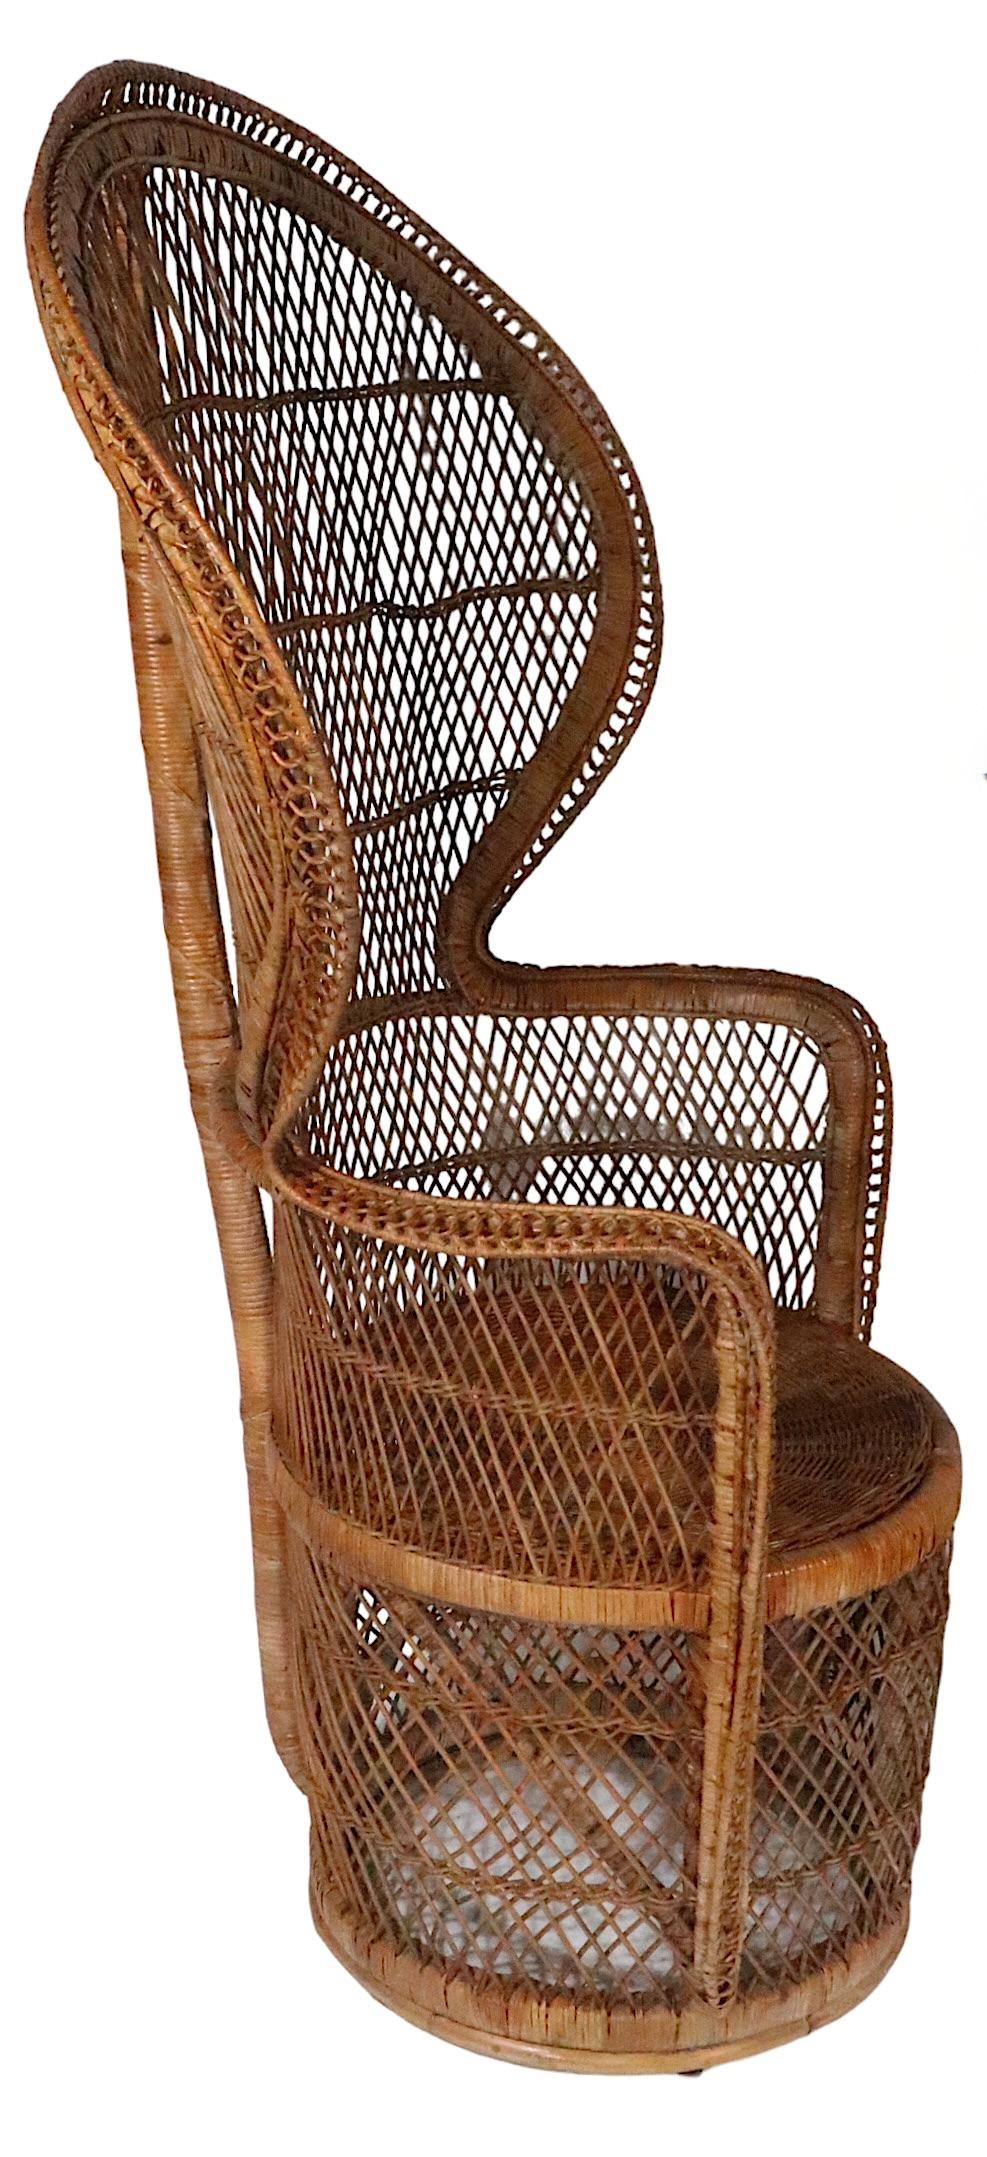 Pr. Vintage Emanuelle Peacock Woven Wicker  Chairs c. 1970's For Sale 4